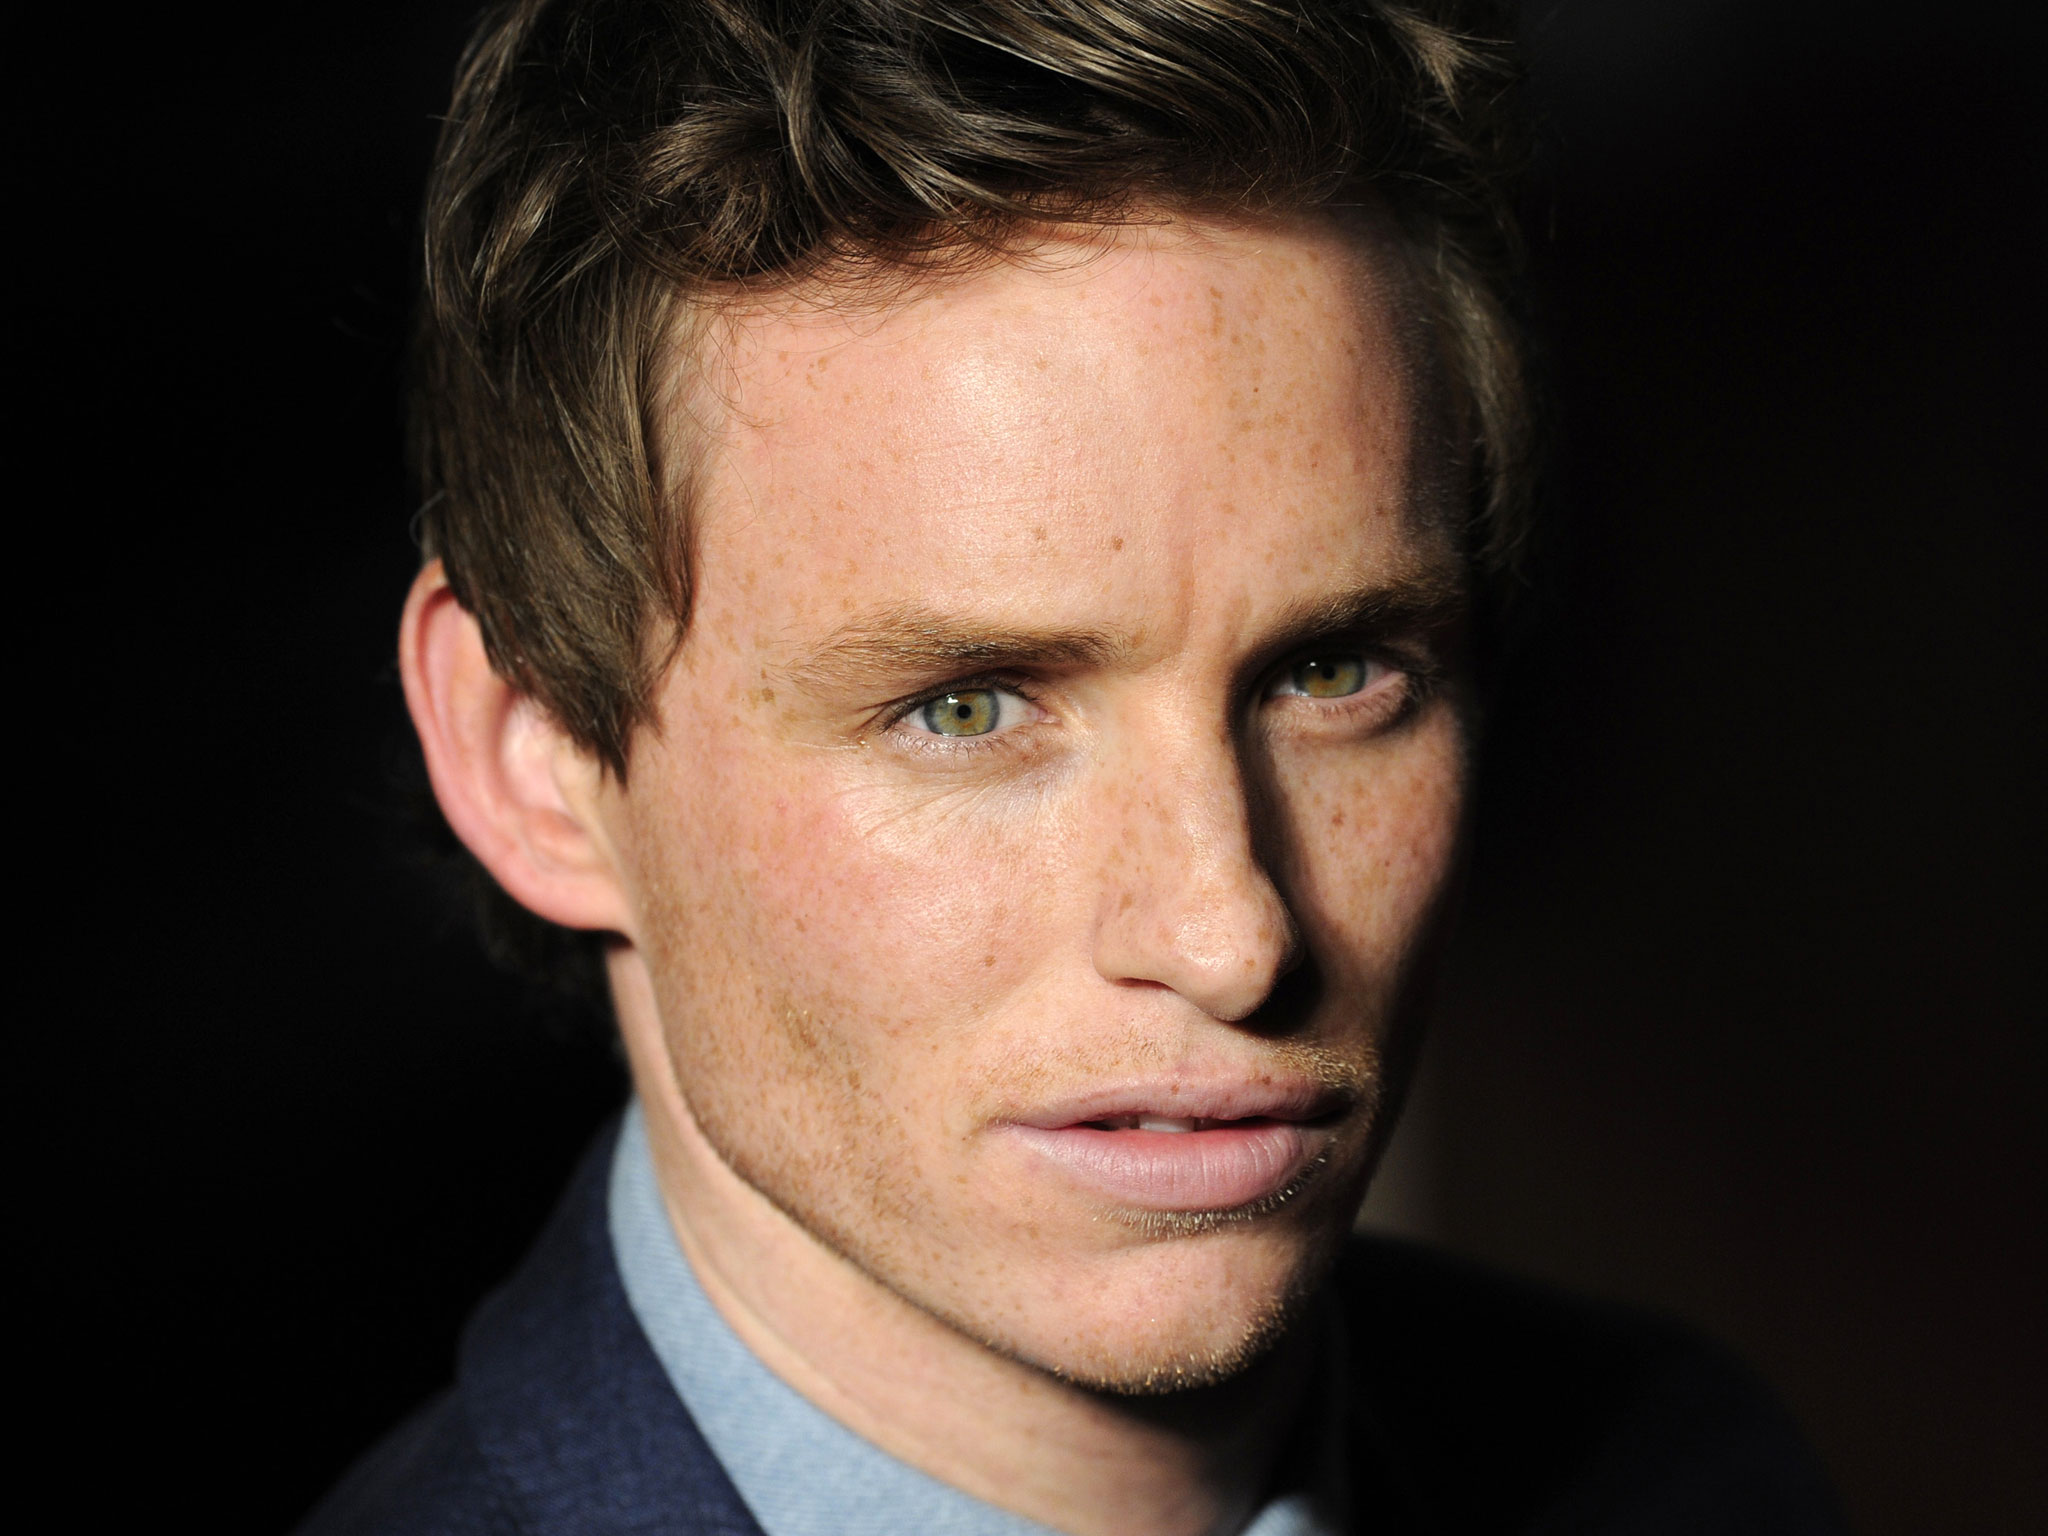 Eddie Redmayne: 'My childhood dreams were crushed after catastrophic Star Wars audition' - News - Films - The Independent